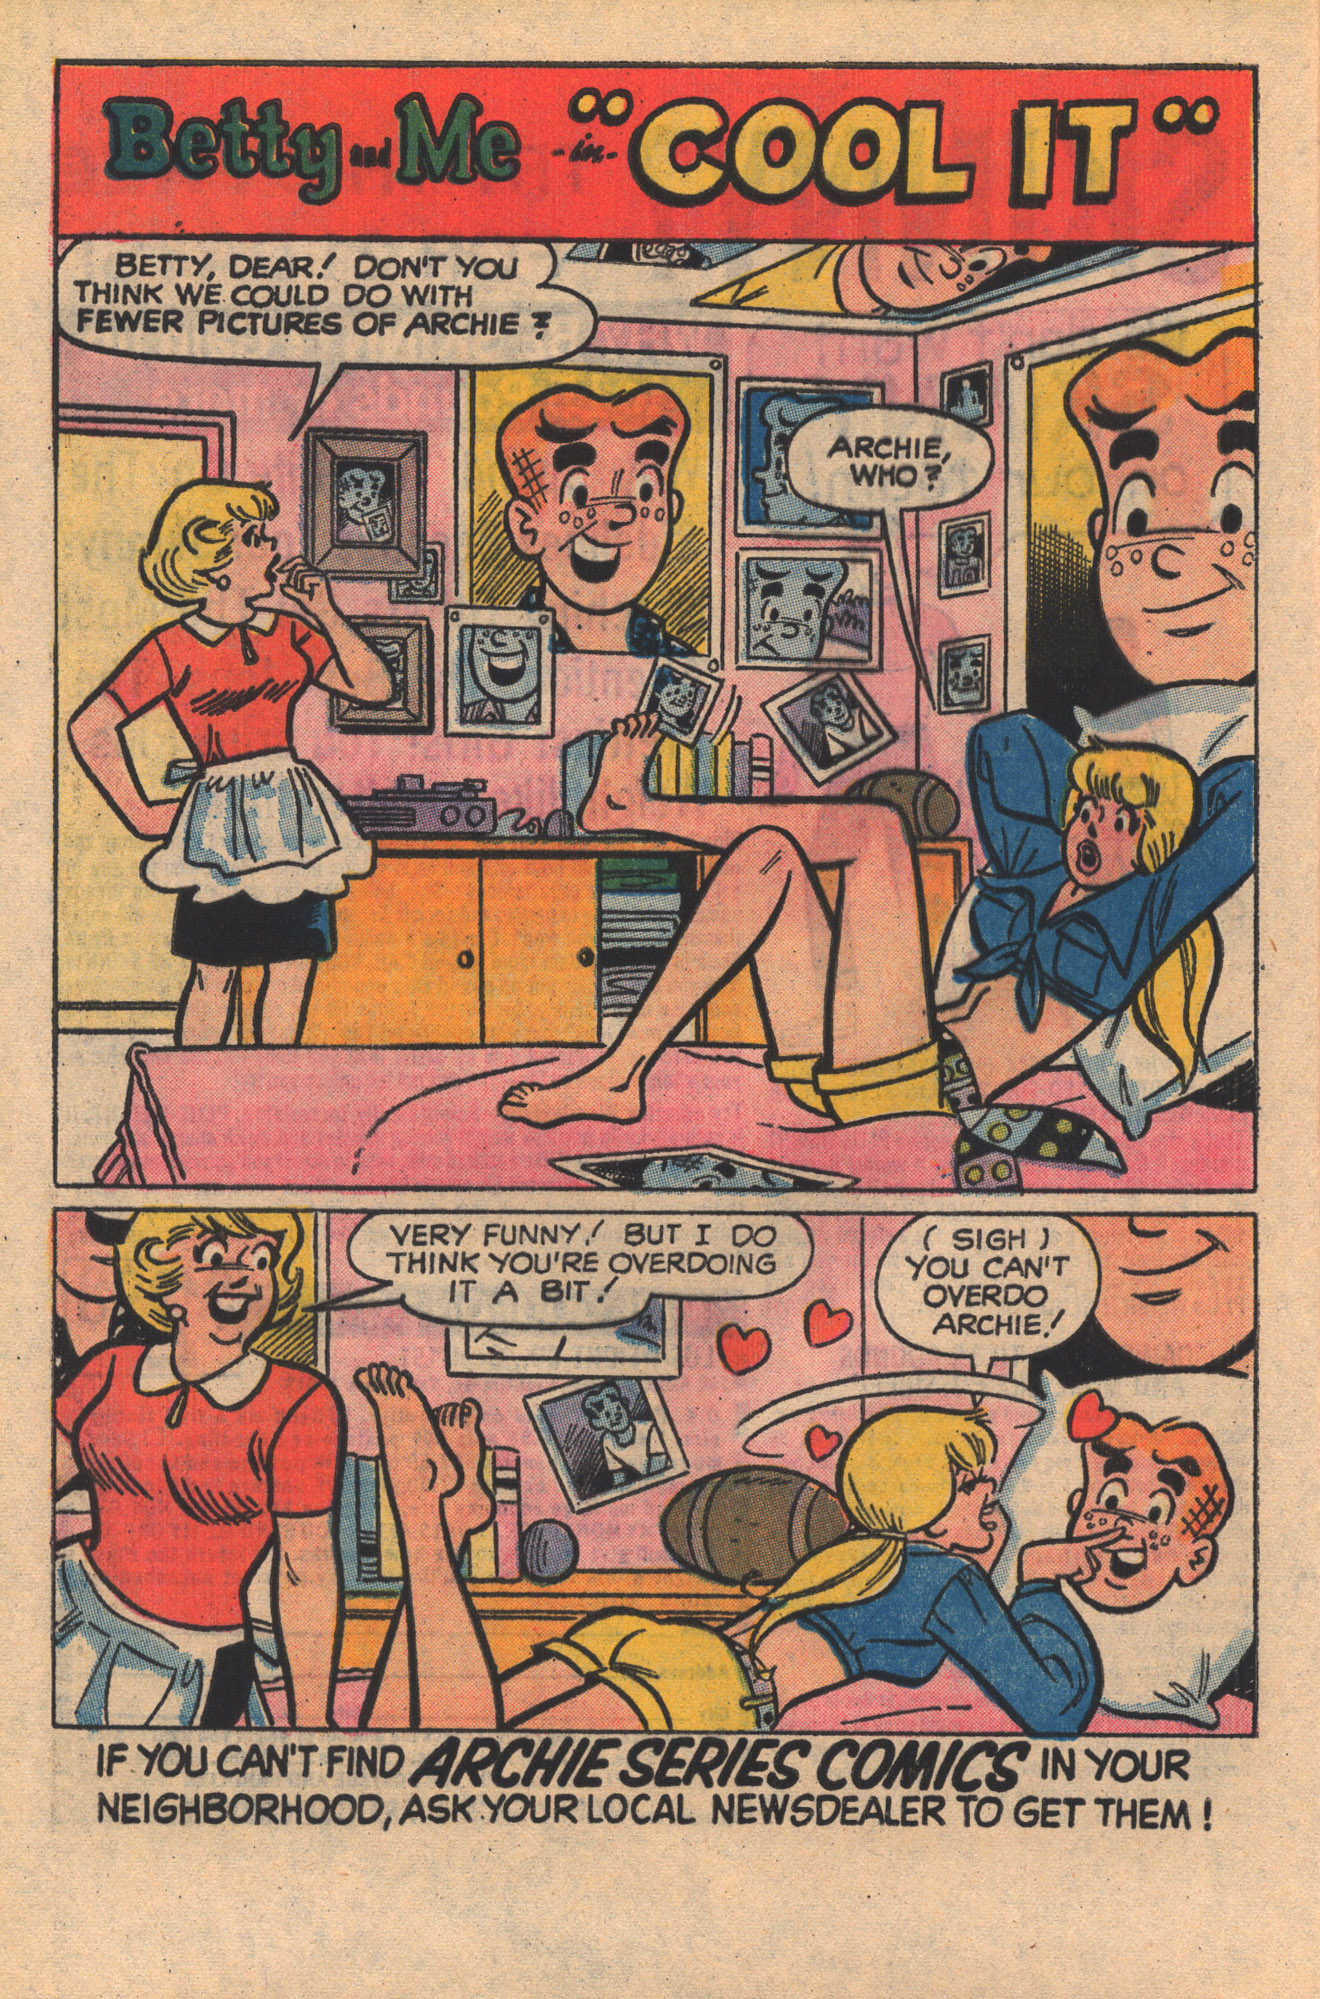 Read online Betty and Me comic -  Issue #52 - 20